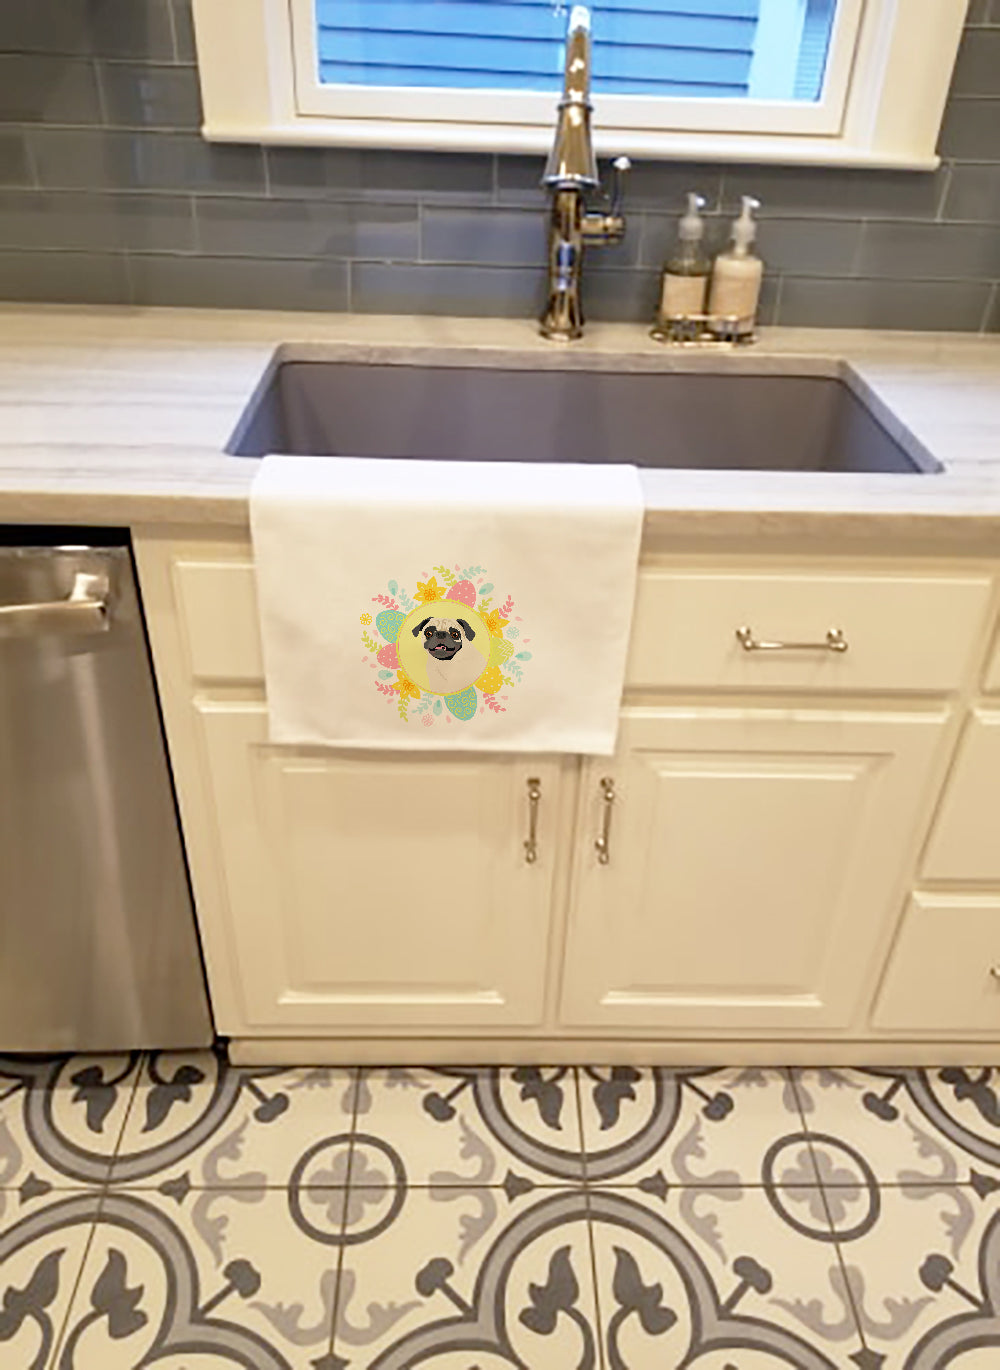 Buy this Pug Fawn #2 Easter White Kitchen Towel Set of 2